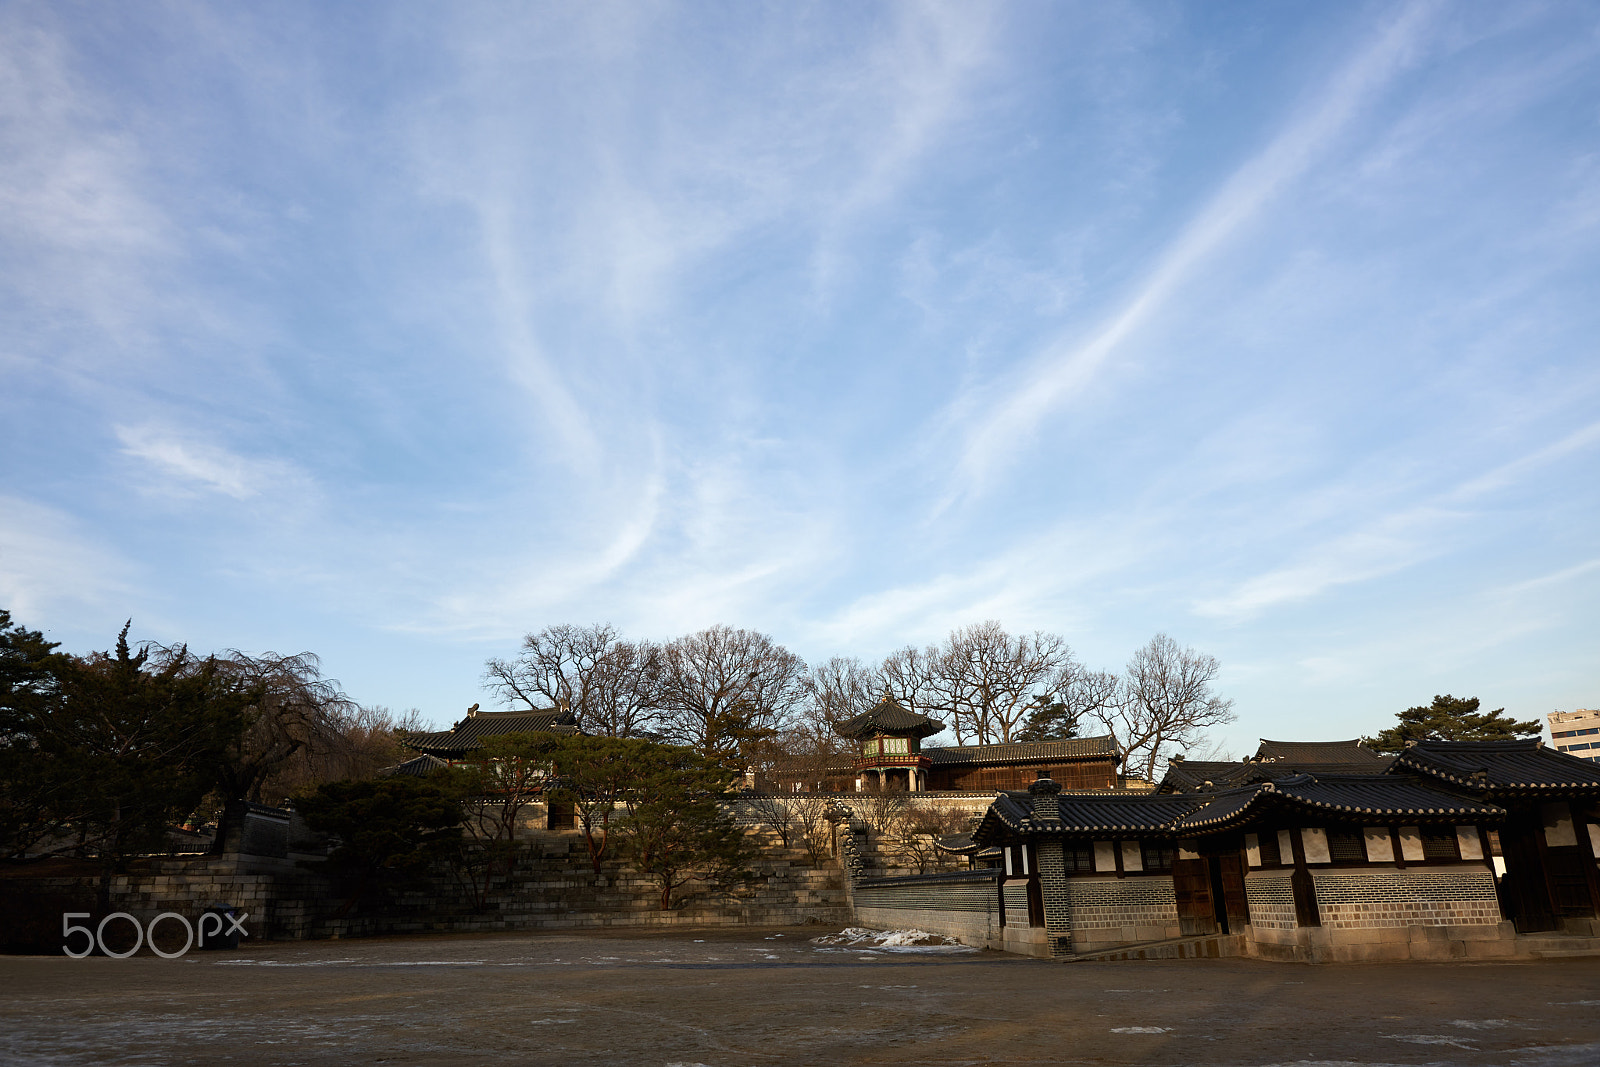 Zeiss Vario-Sonnar T* 24-70 mm F2.8 ZA SSM (SAL2470Z) sample photo. Sky in the royal palace photography